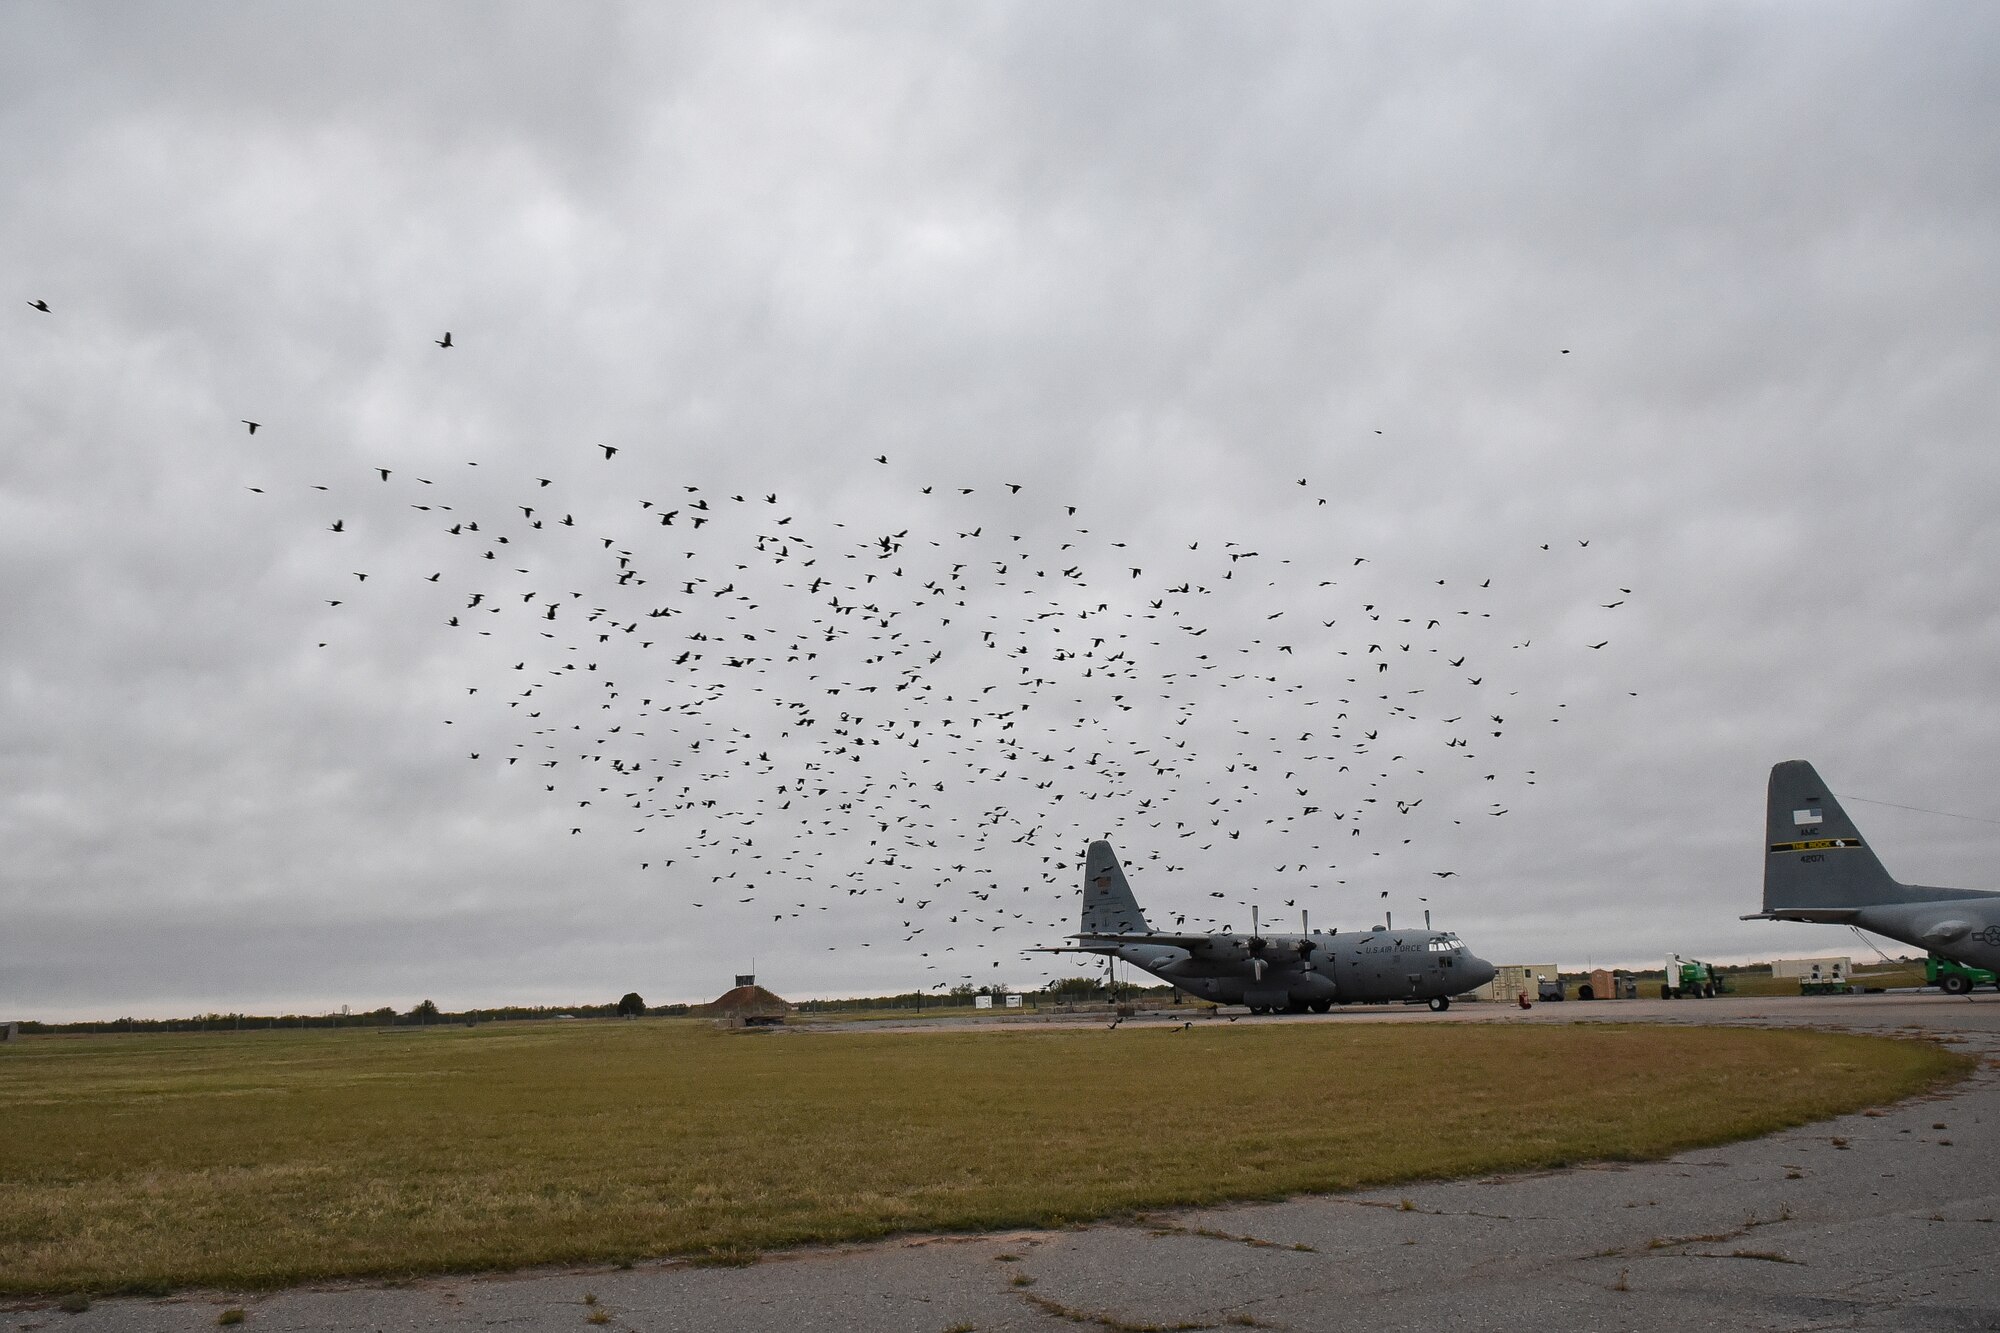 Grackles fly over Sheppard AFB airfield